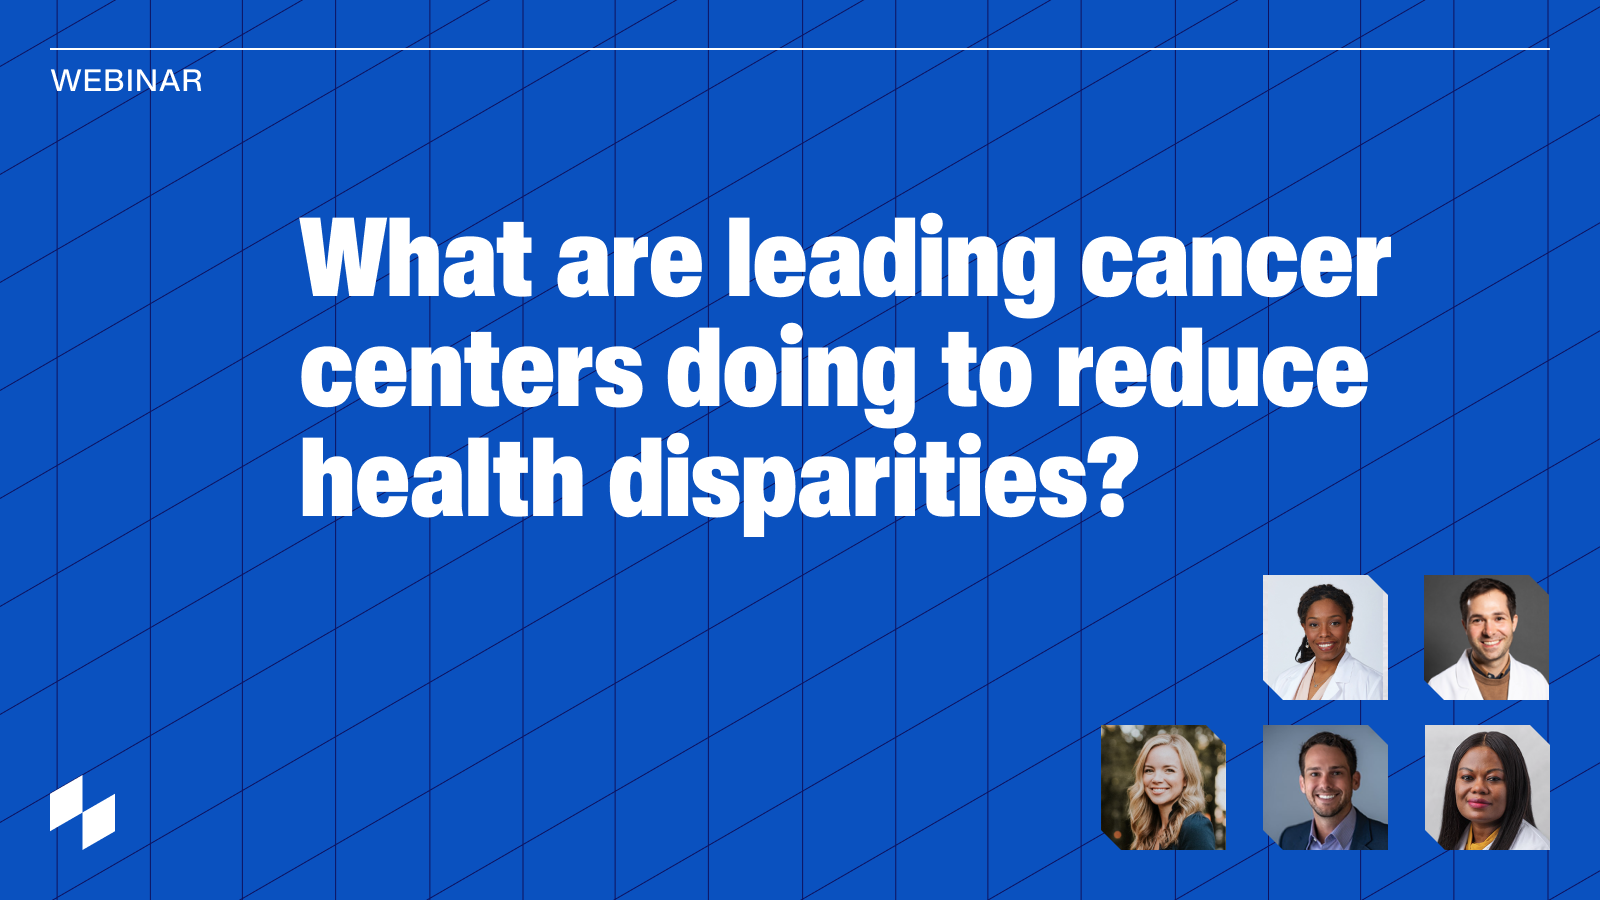 What are leading cancer centers doing to reduce health disparities